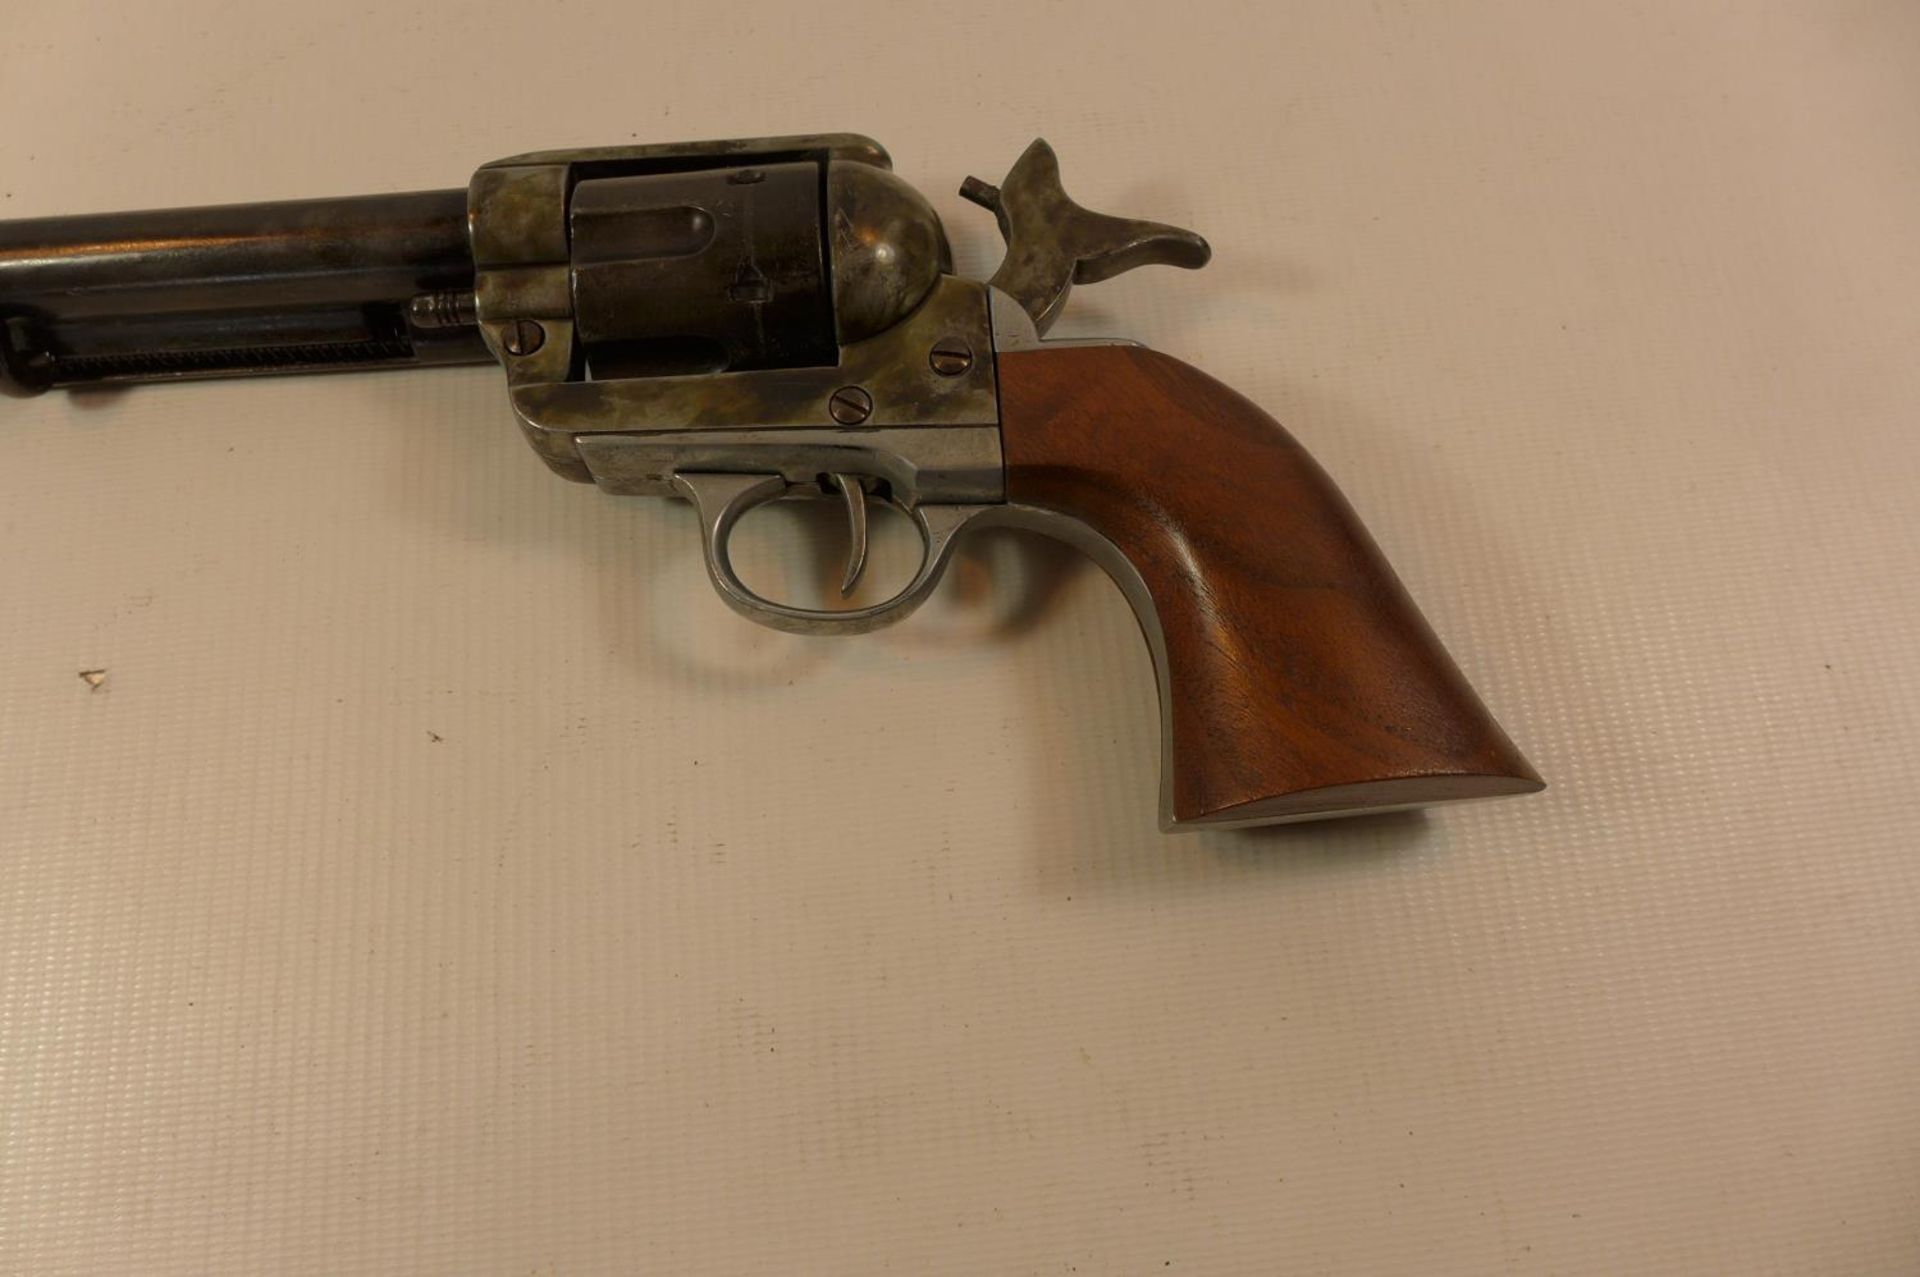 A REPLICA BLANK FIRING COLT REVOLVER WITH 14CM BARREL - Image 4 of 4